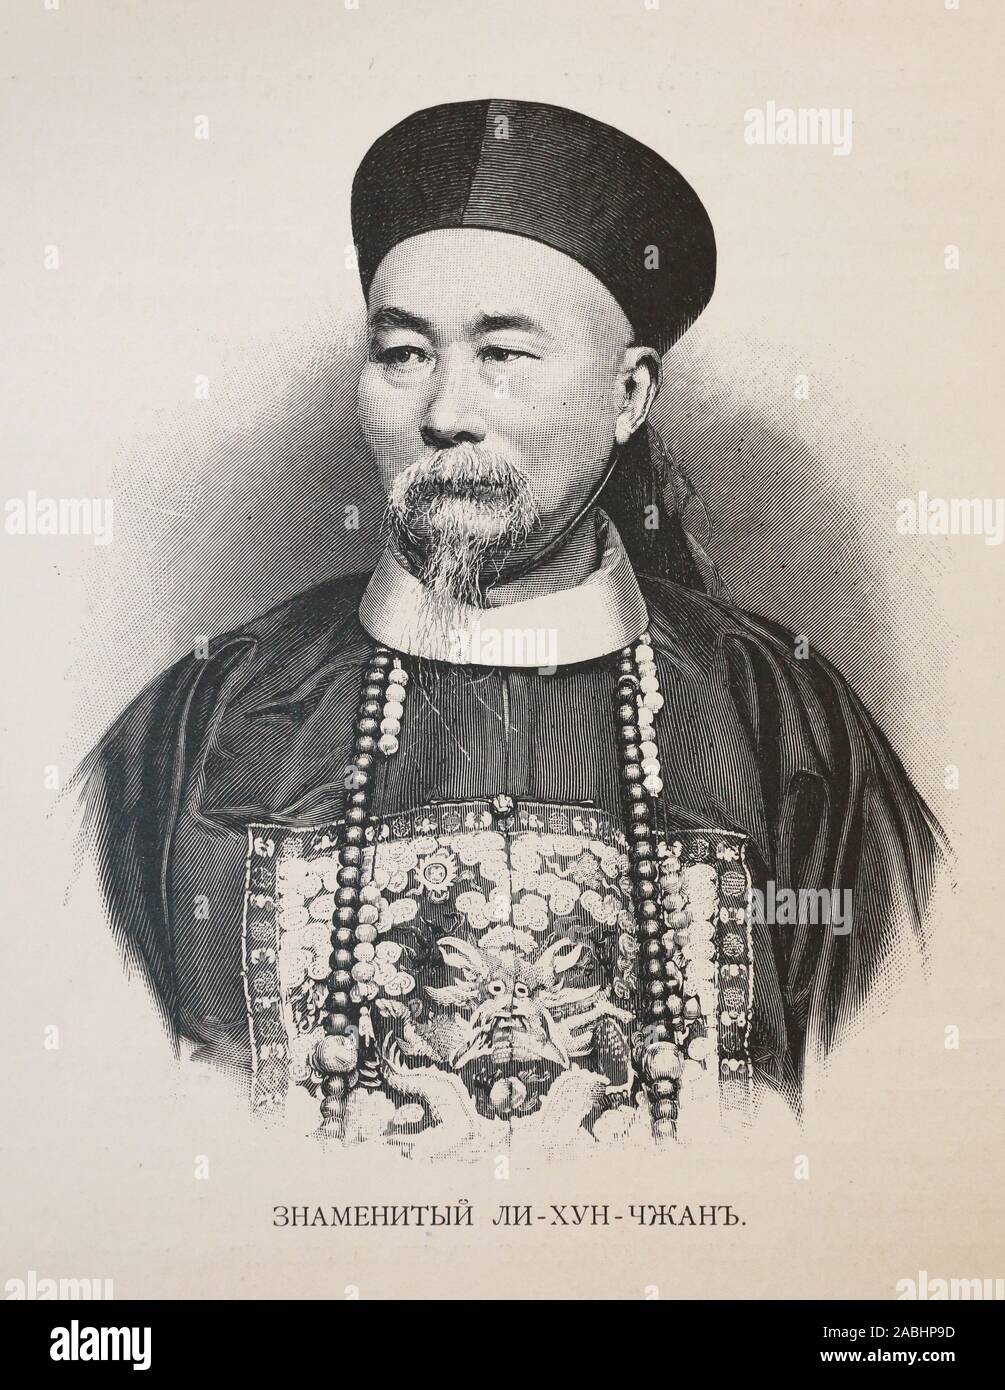 Portrait of Li Hongzhang. Engraving of the 19th century. Li Hongzhang, Marquess Suyi (also romanised as Li Hung-chang) (15 February 1823 – 7 November 1901), was a Chinese politician, general and diplomat of the late Qing dynasty. He quelled several major rebellions and served in important positions in the Qing imperial court, including the Viceroy of Zhili, Huguang and Liangguang. Stock Photo